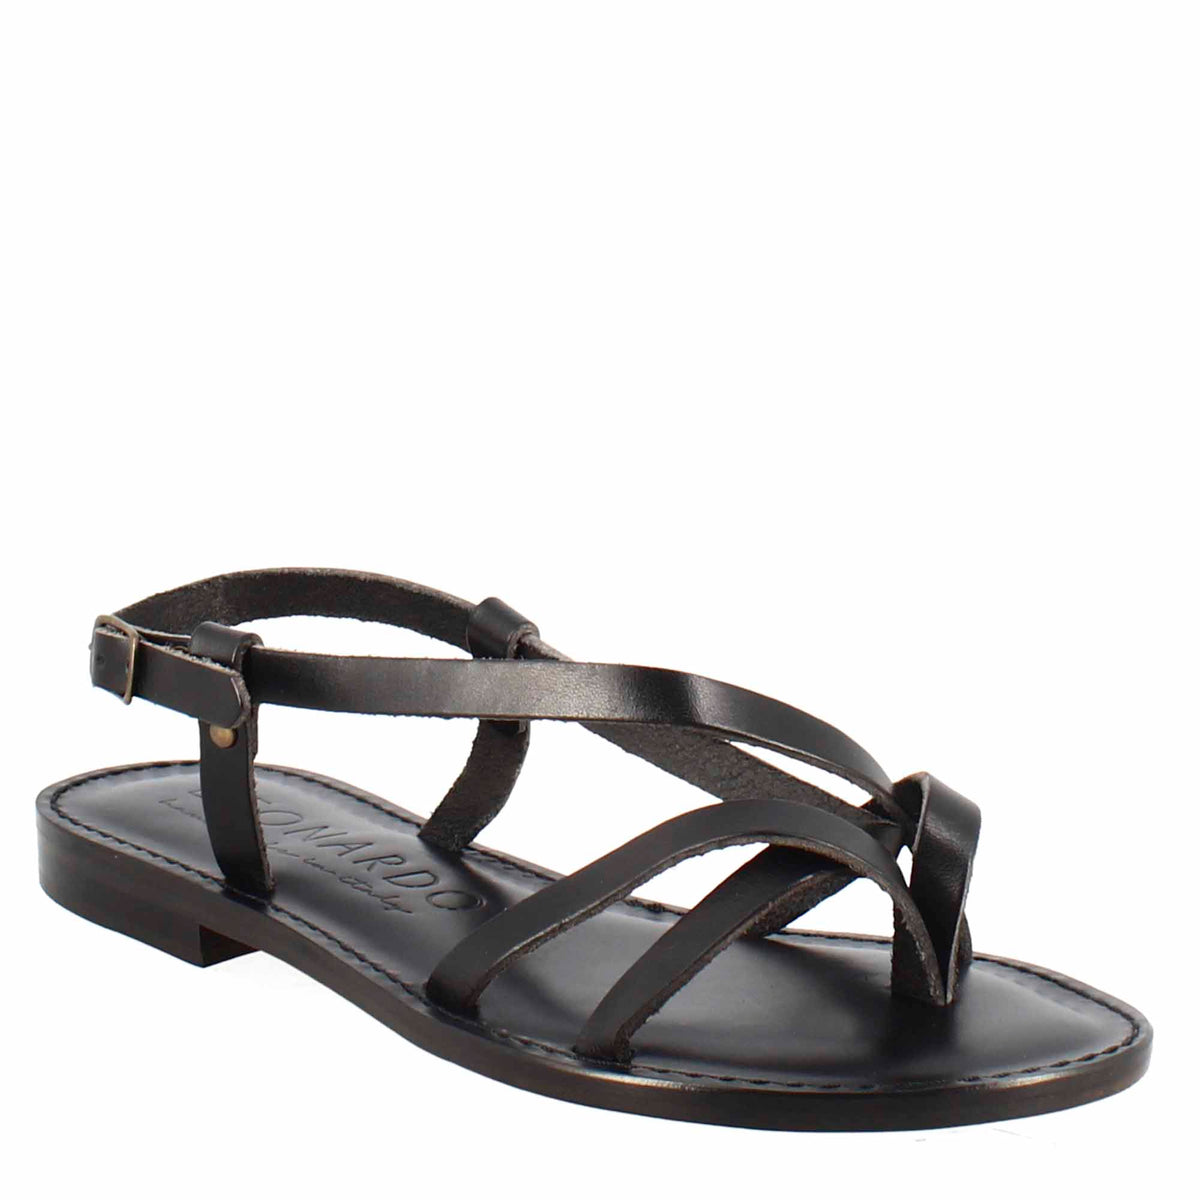 Solace women's sandals in ancient Roman style in black leather 